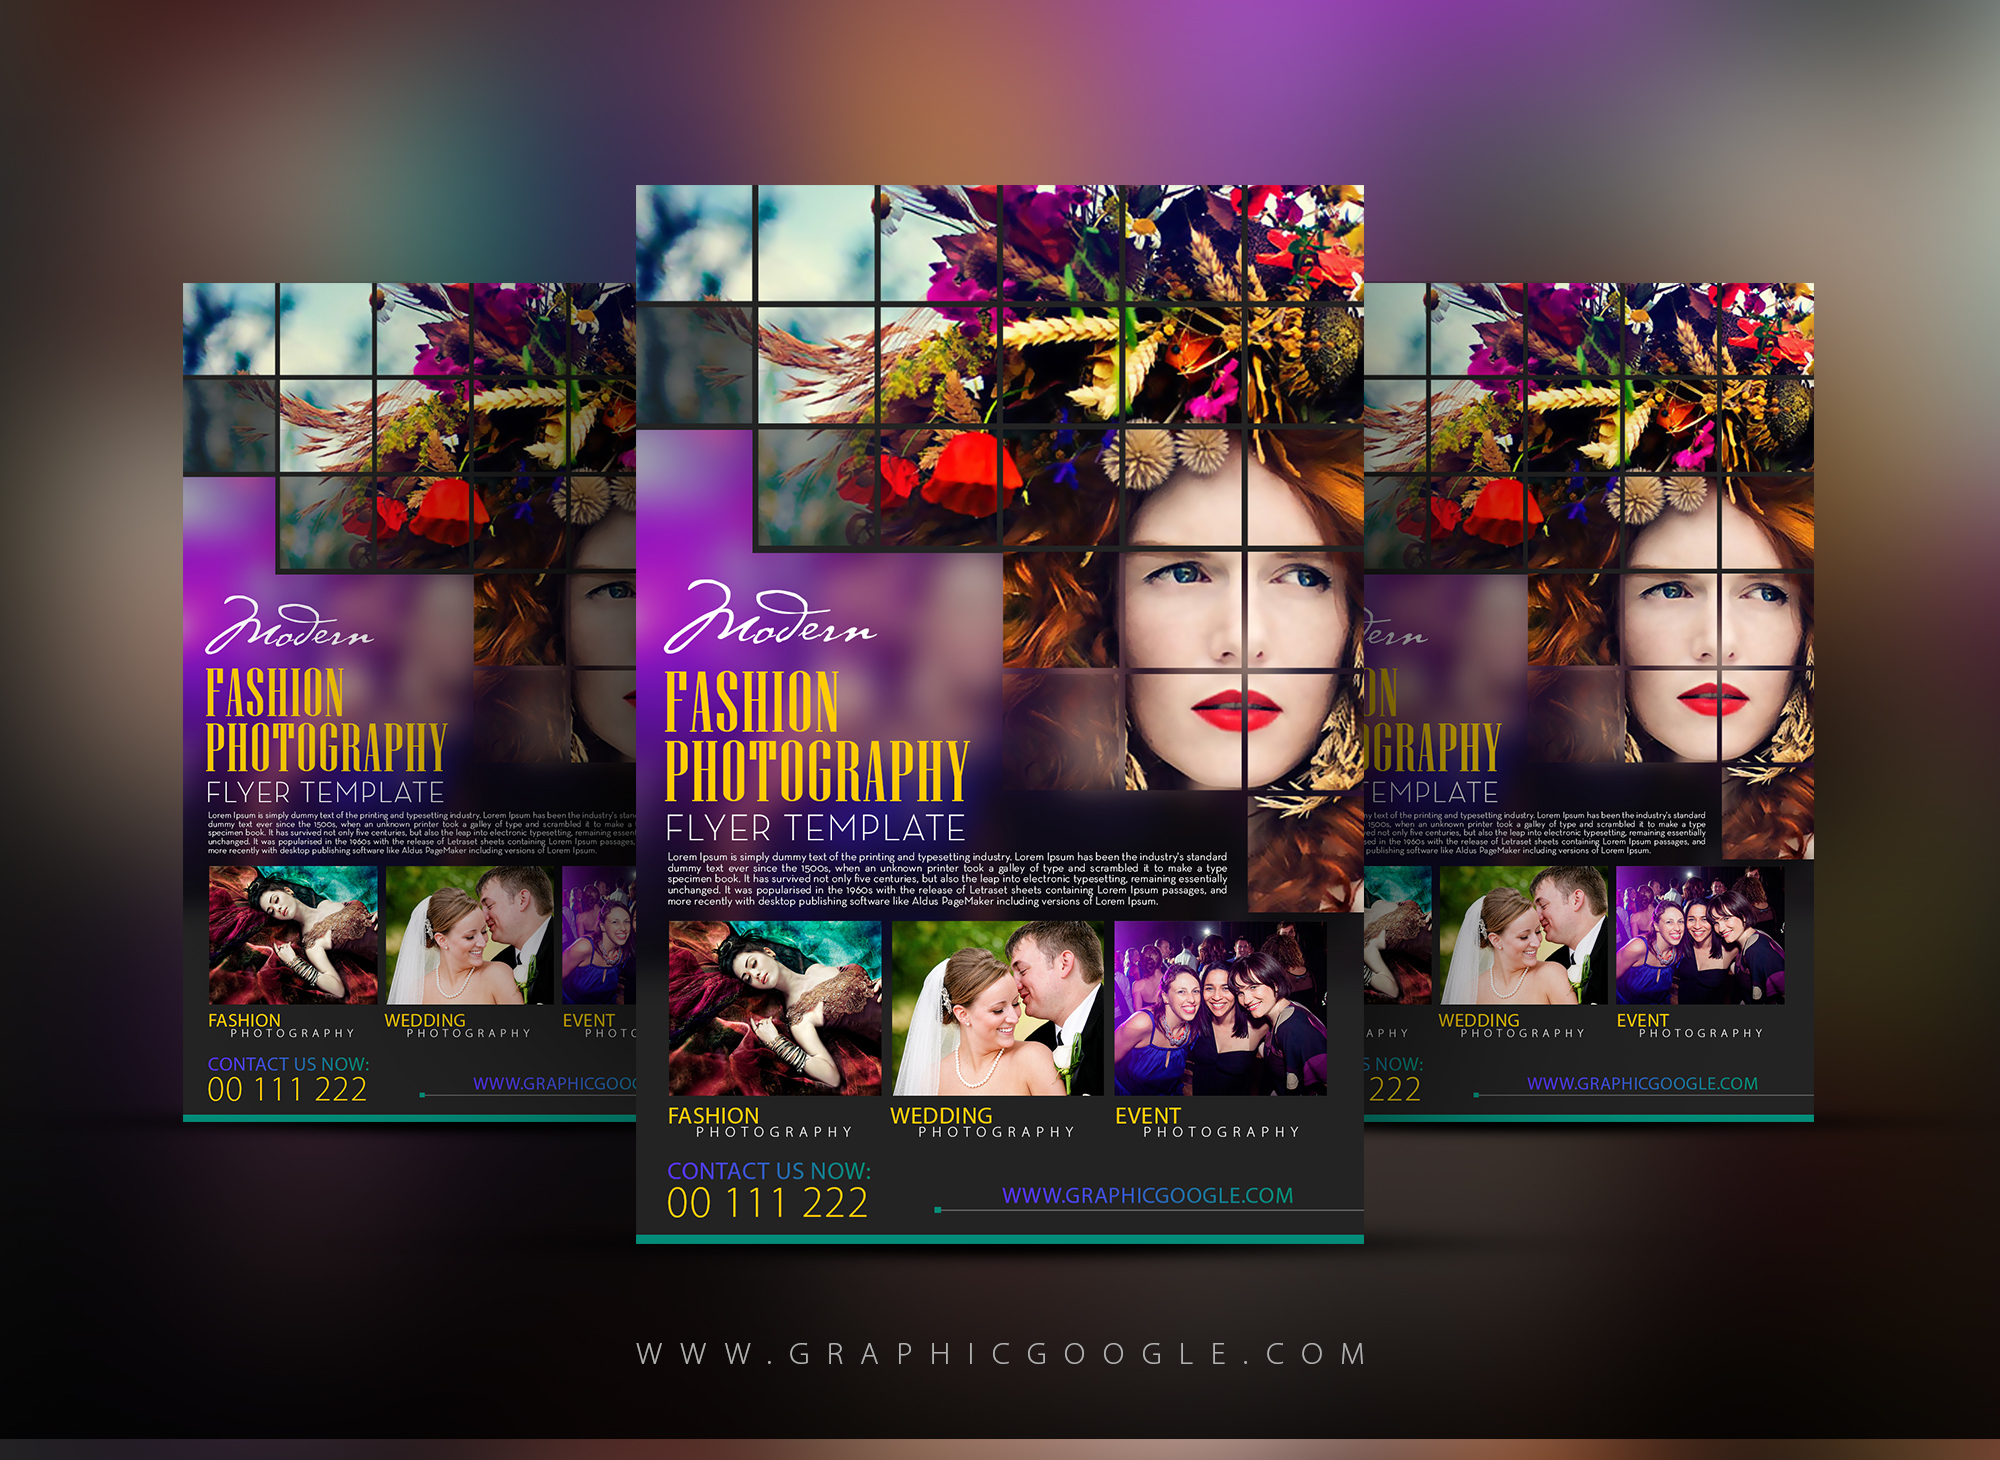 Free-Modern-Fashion-Photography-Flyer-Template-300